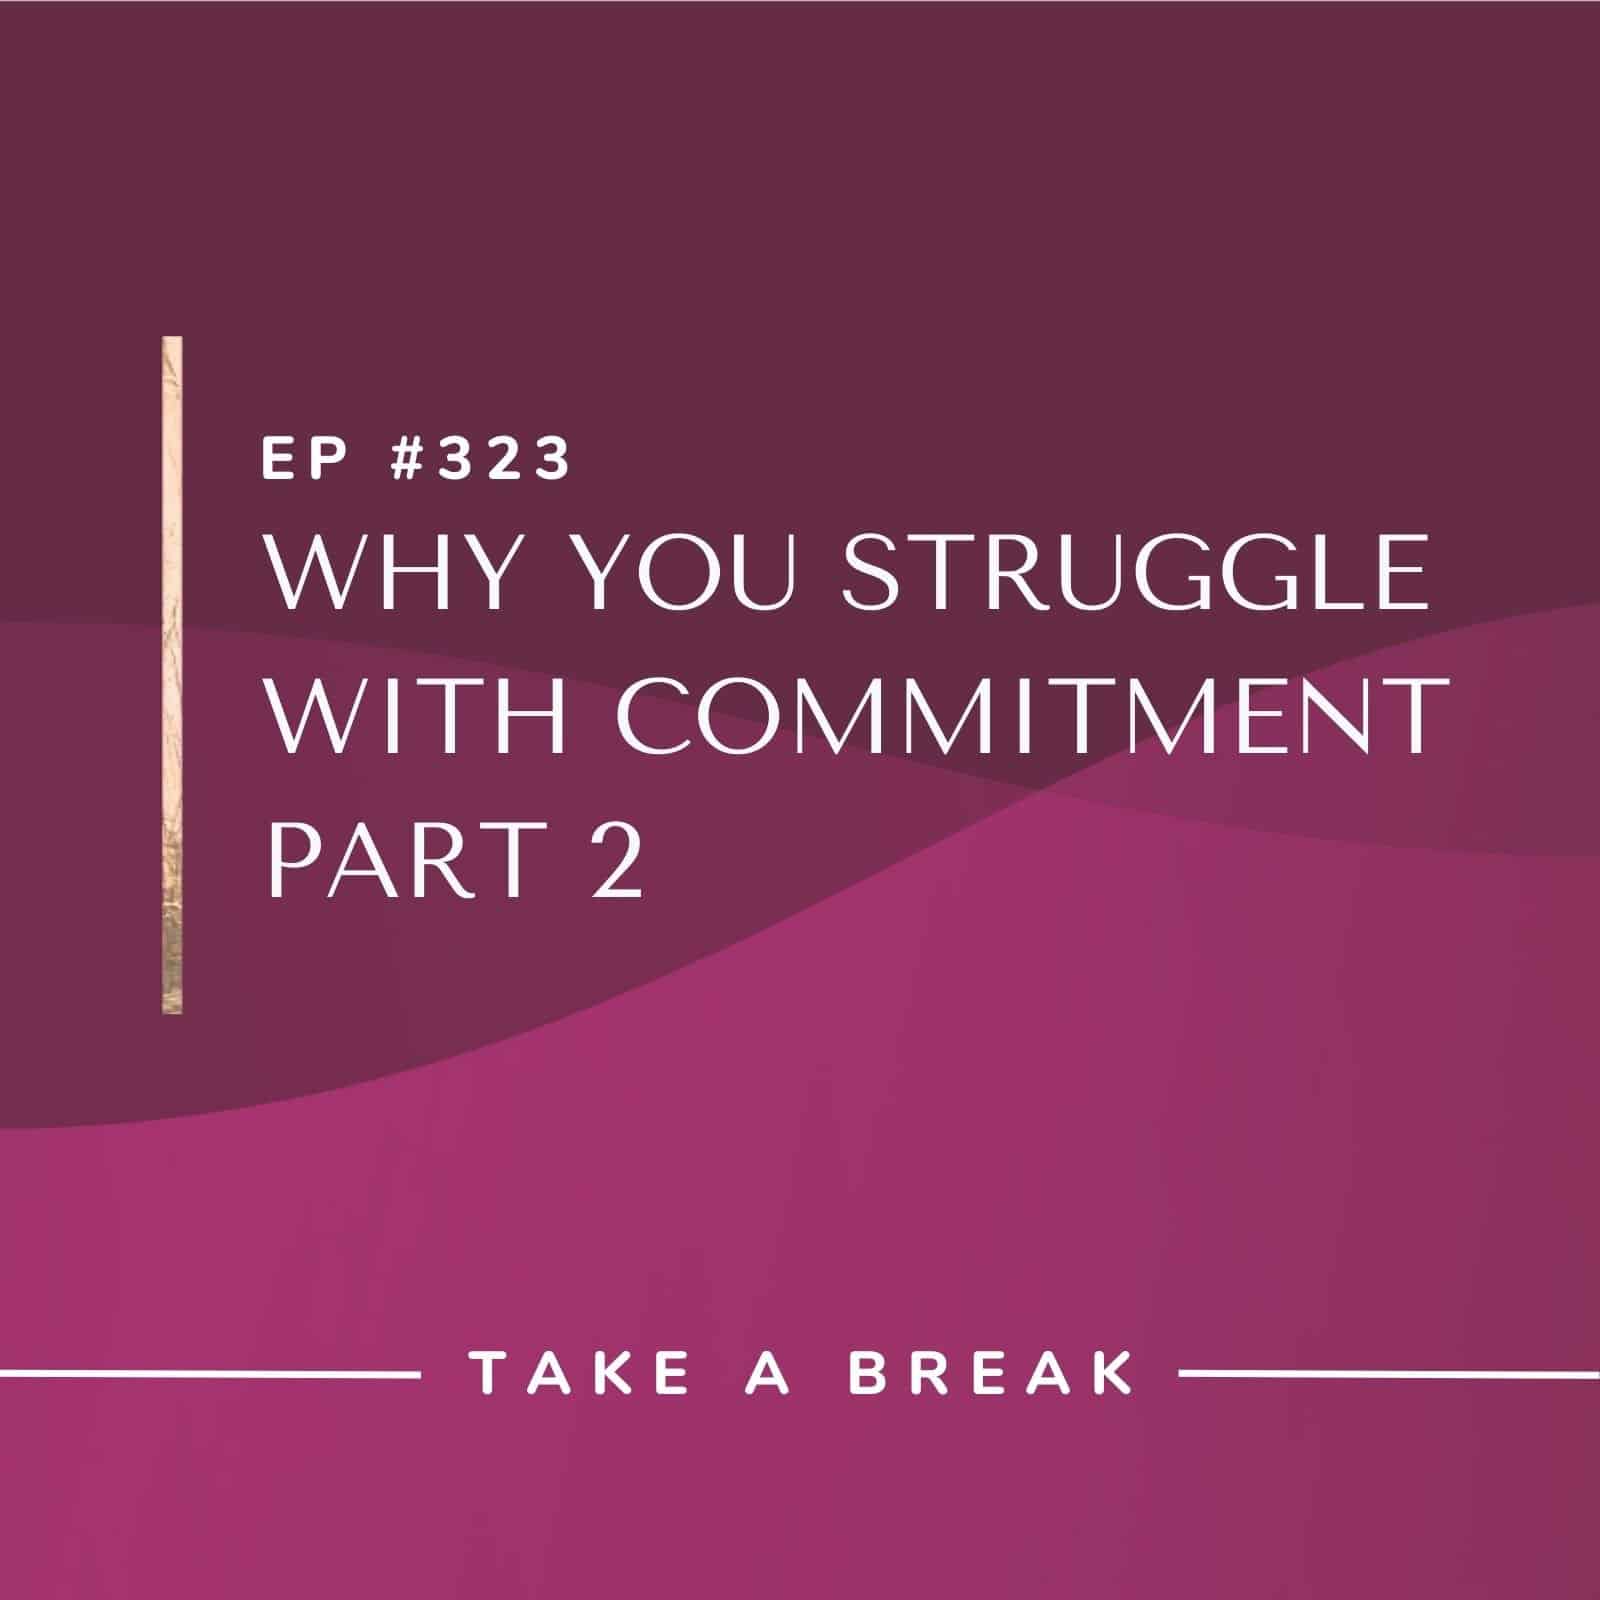 Take A Break from Drinking with Rachel Hart | Why You Struggle With Commitment Part 2